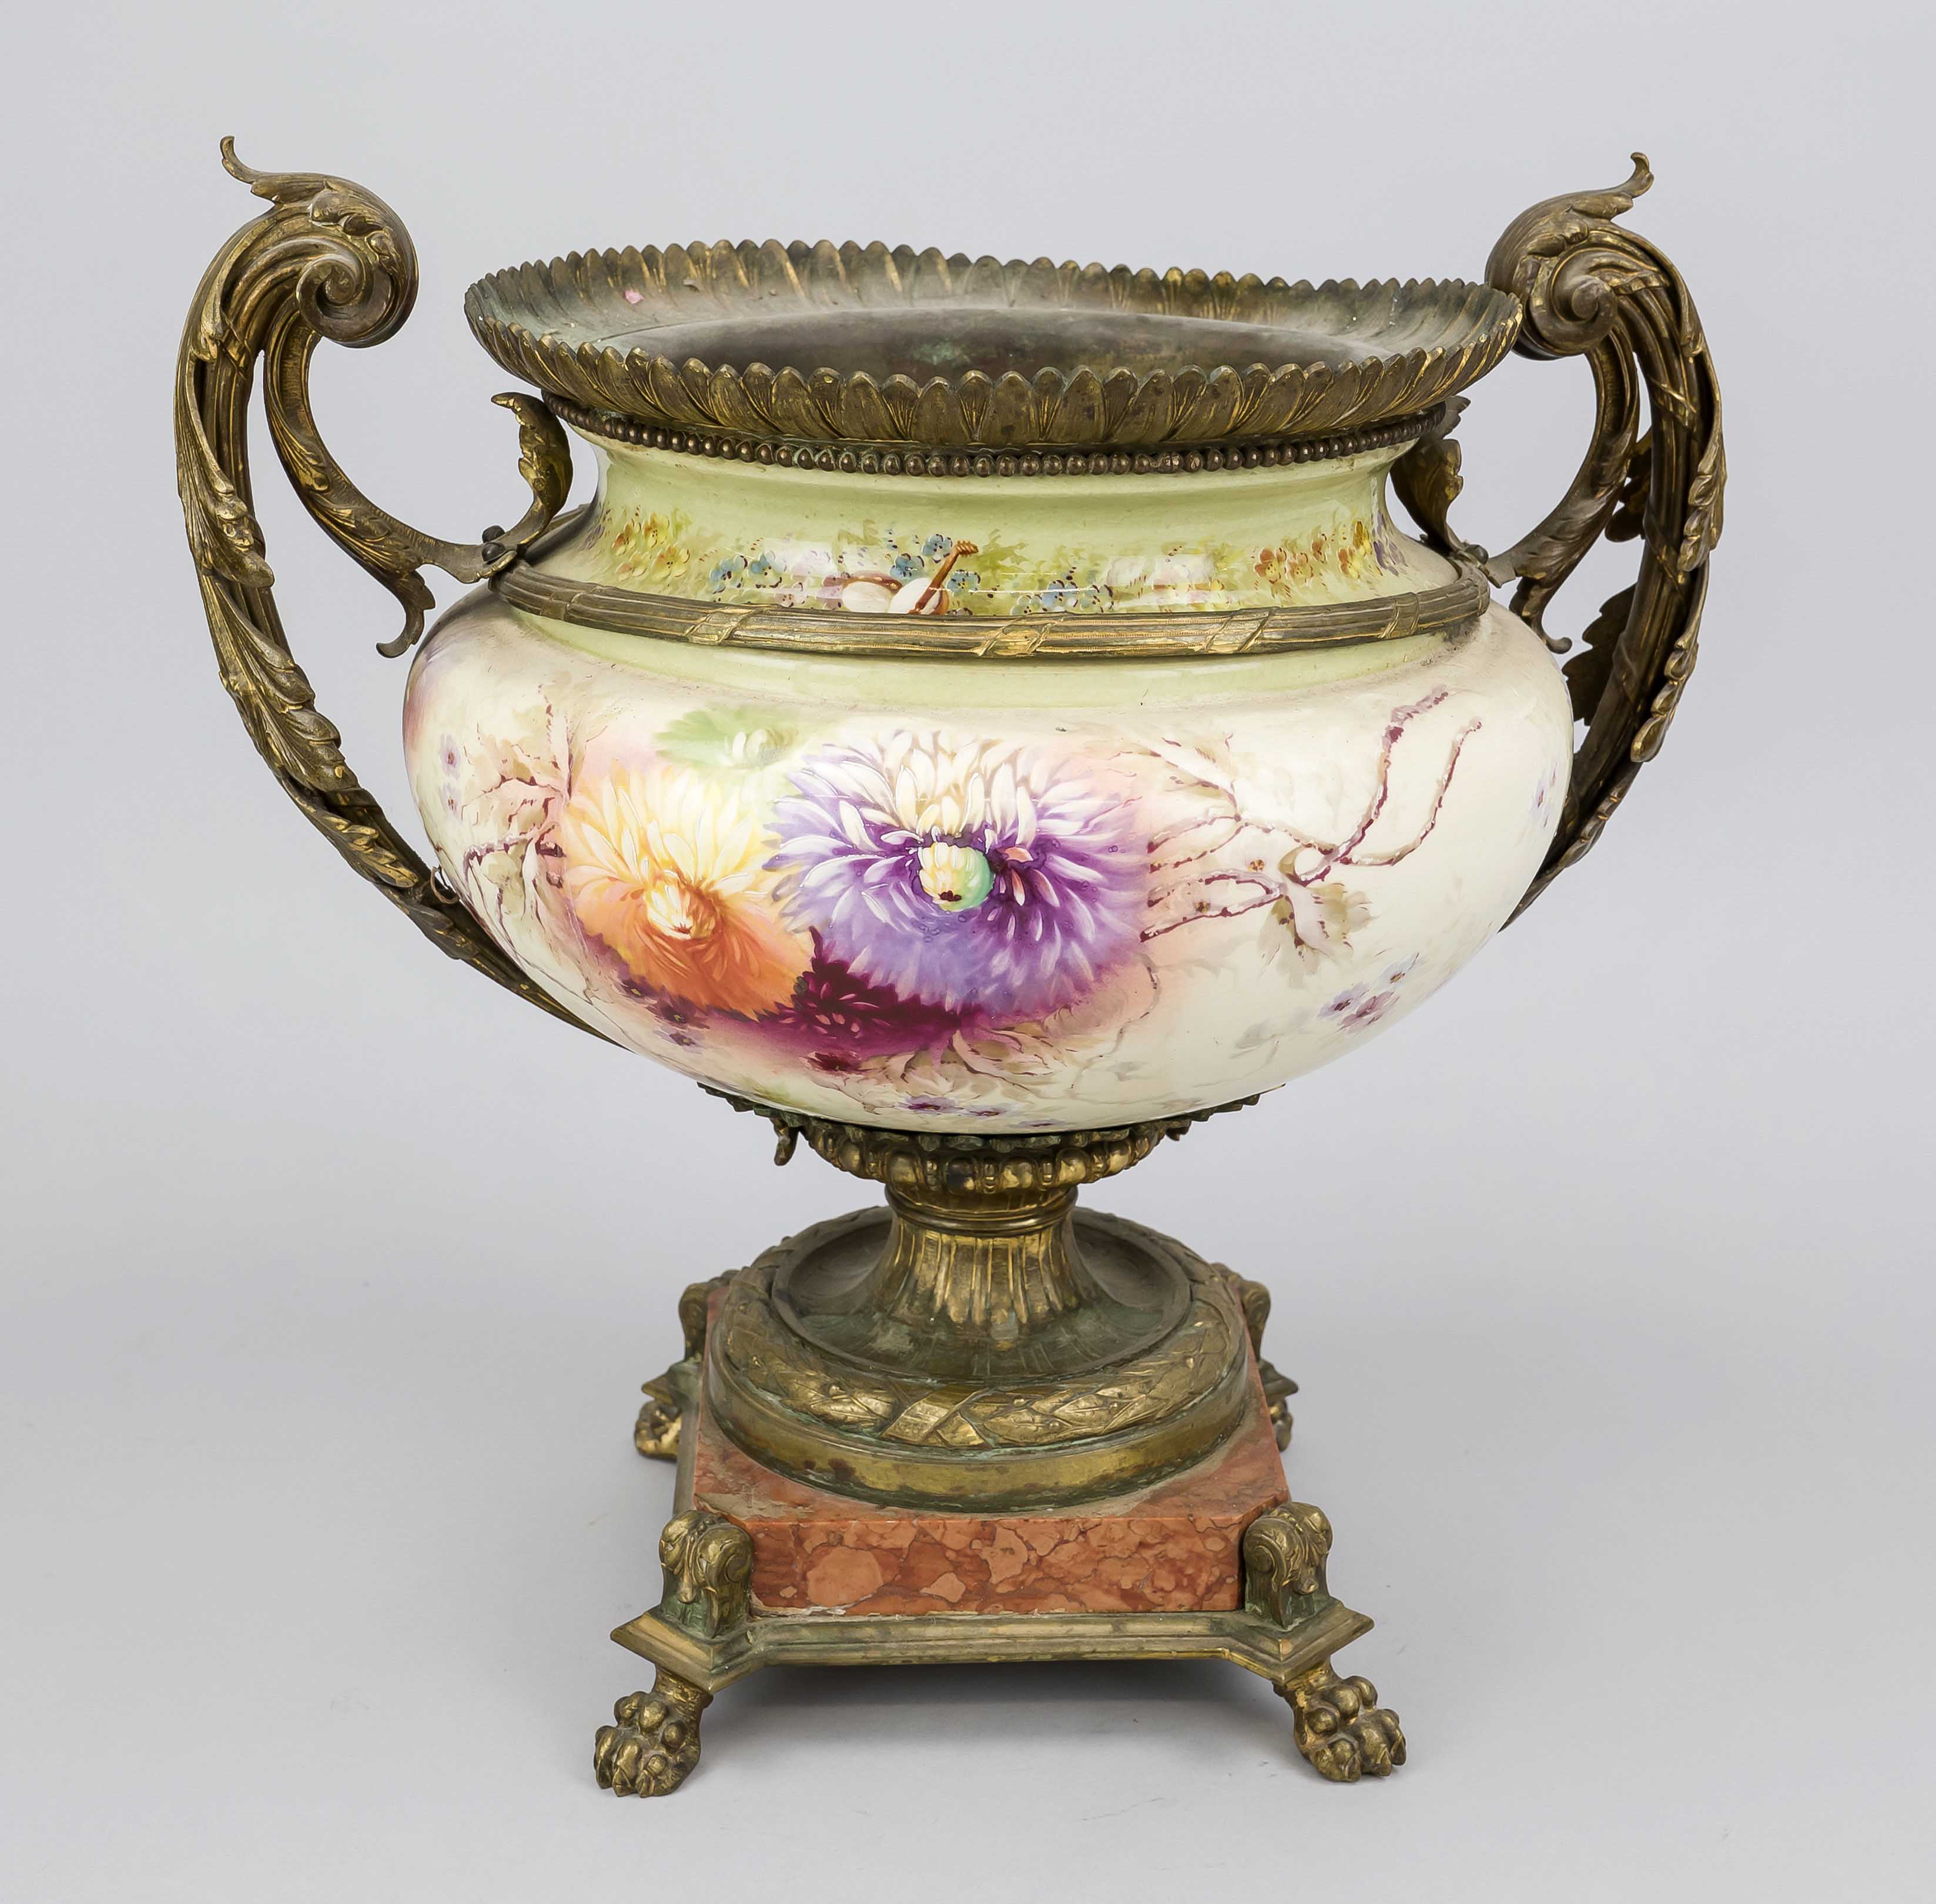 Magnificent cachepot, late 19th century, metal vase with polychrome enamel painting of flowers on